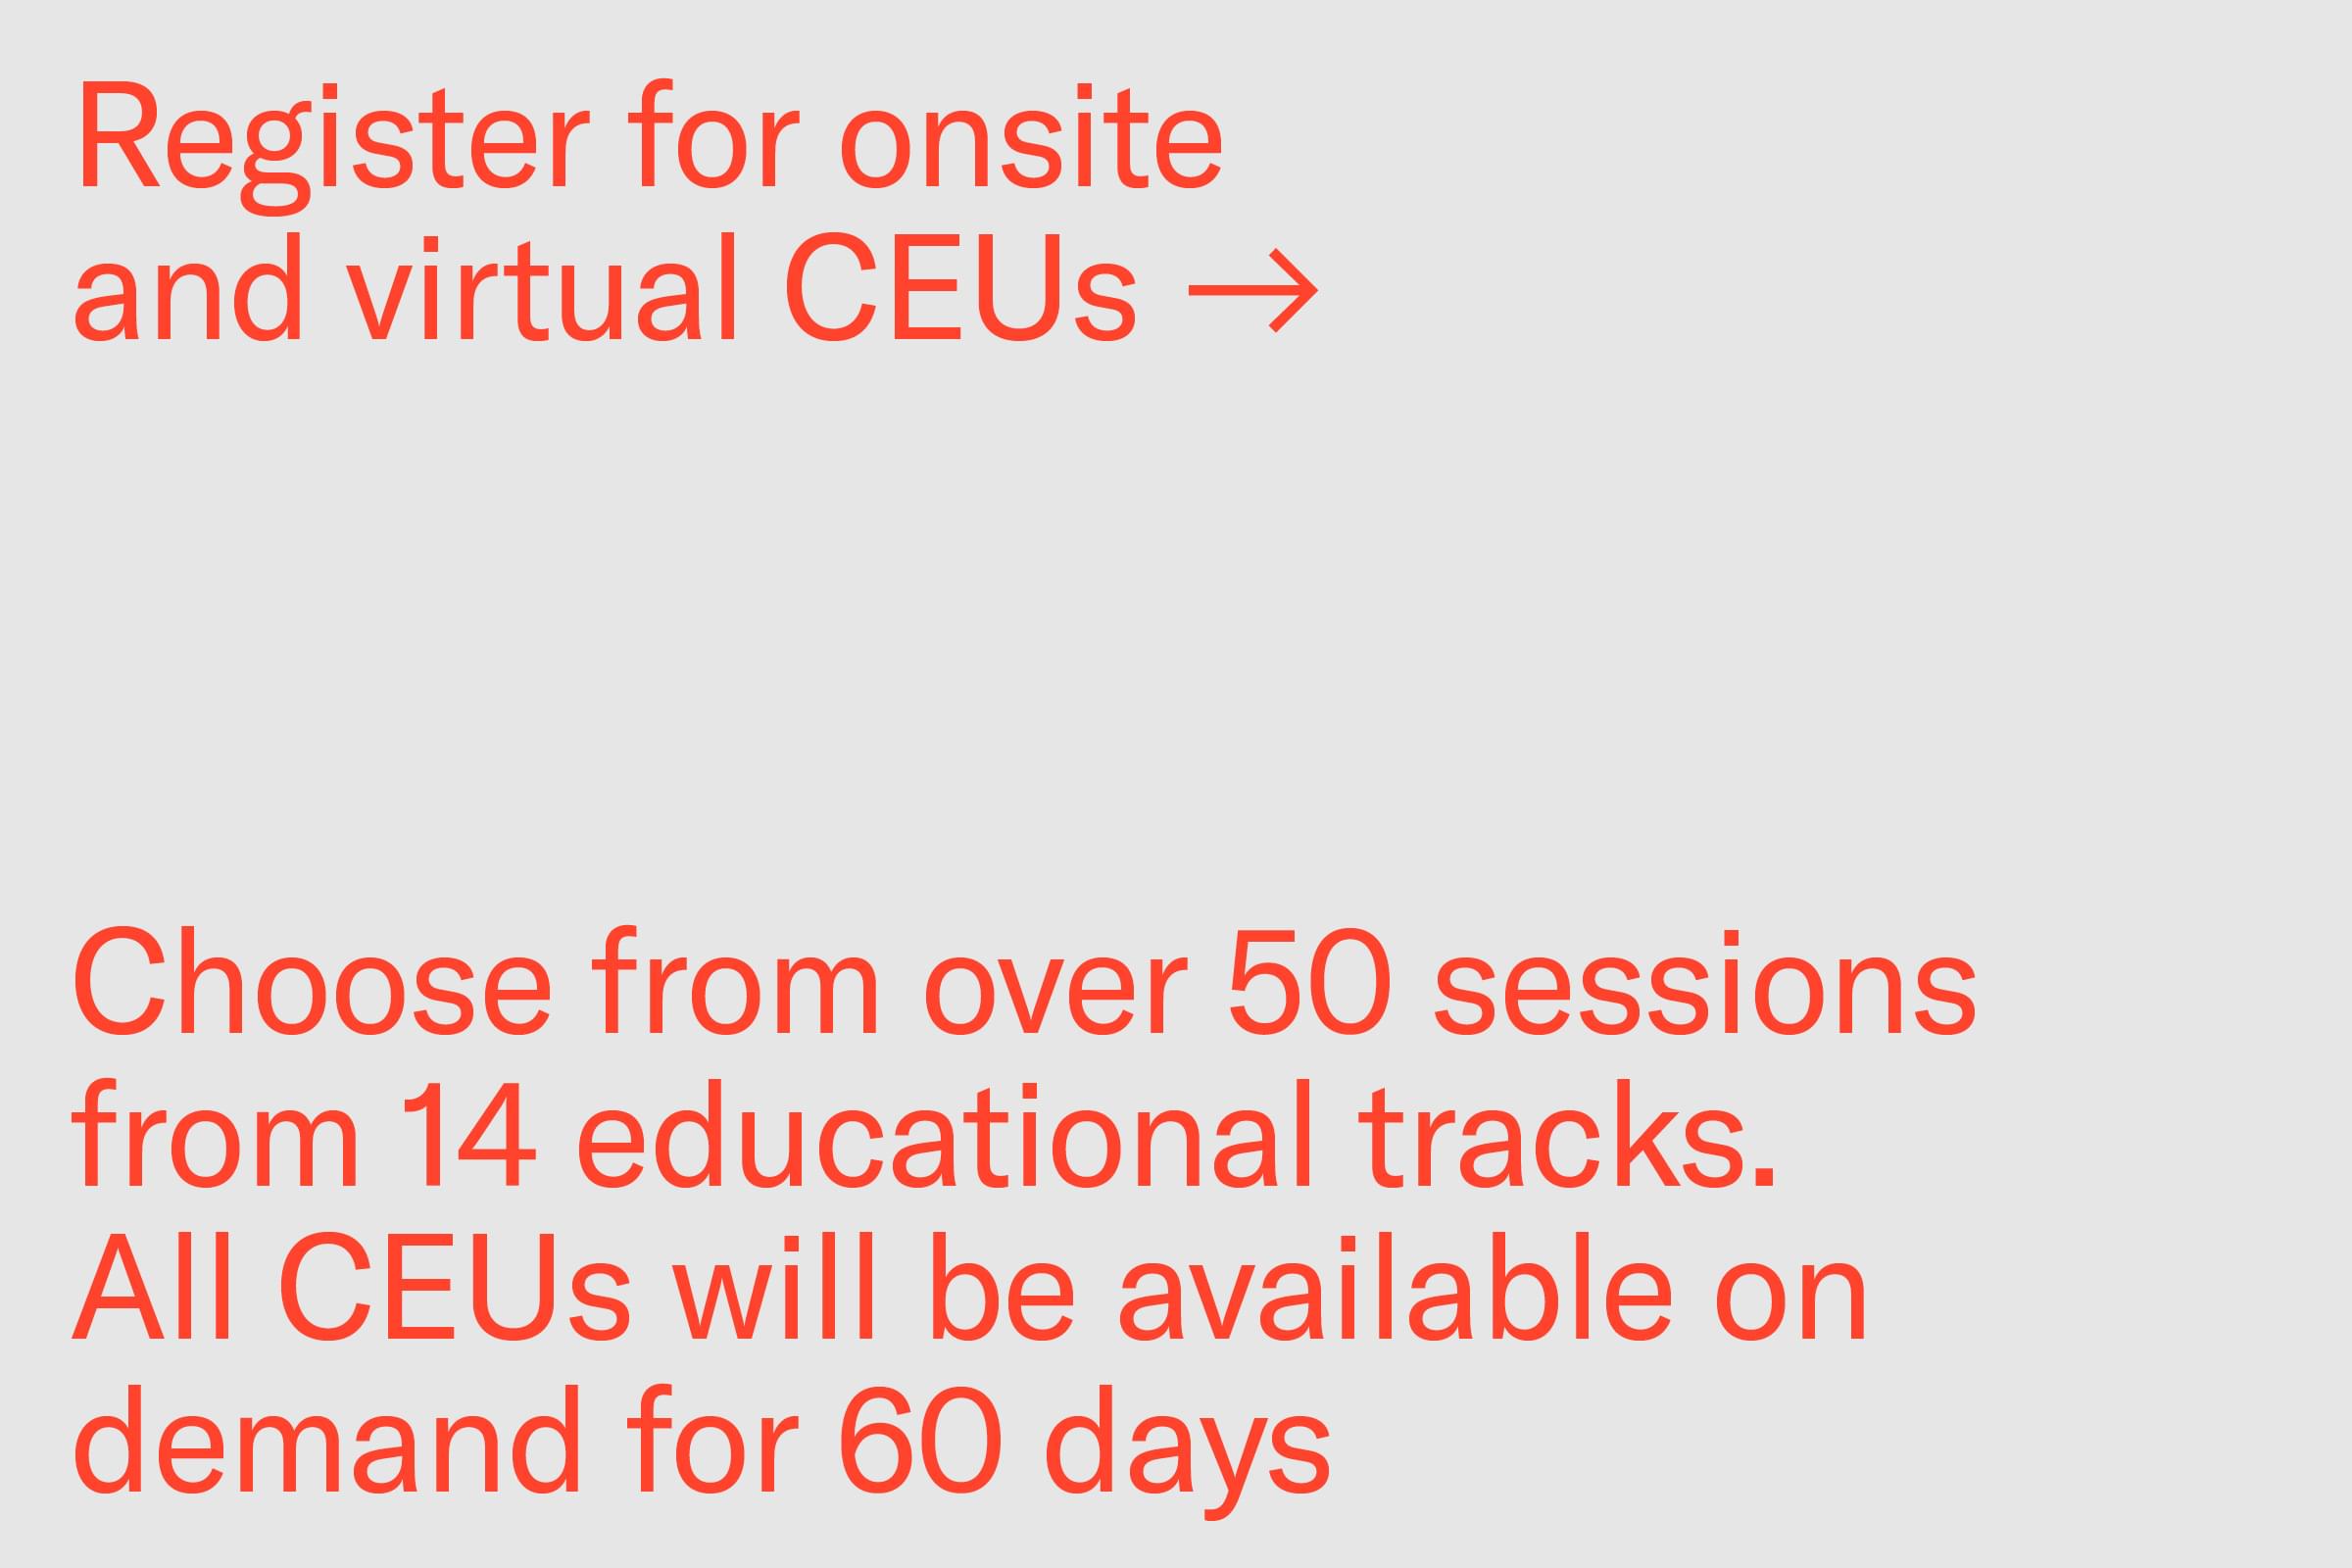 Register for onsite and virtual CEUs. Choose from over 50 sessins from 14 educational tracks. All CEUs will be available on demand for 60 days.